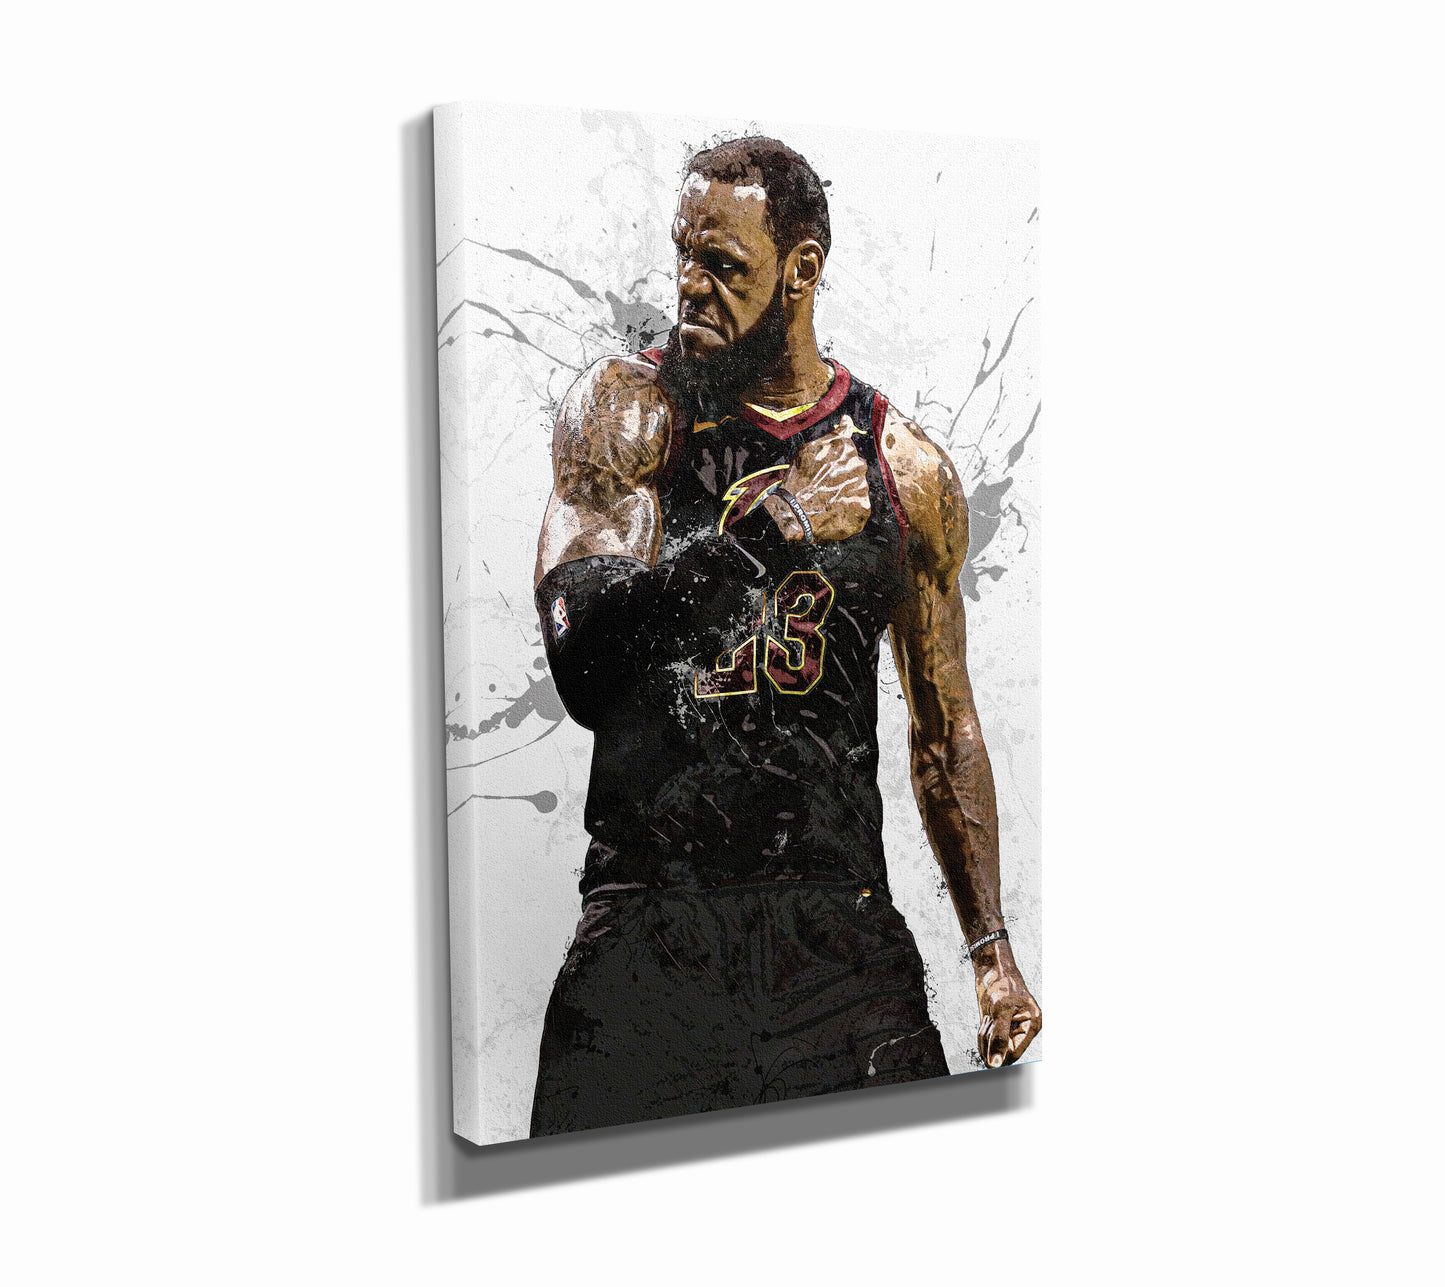 Lebron James Art Poster Cleveland Cavaliers Basketball Hand Made Posters Canvas Framed Print Wall Kids Art Man Cave Gift Home Decor